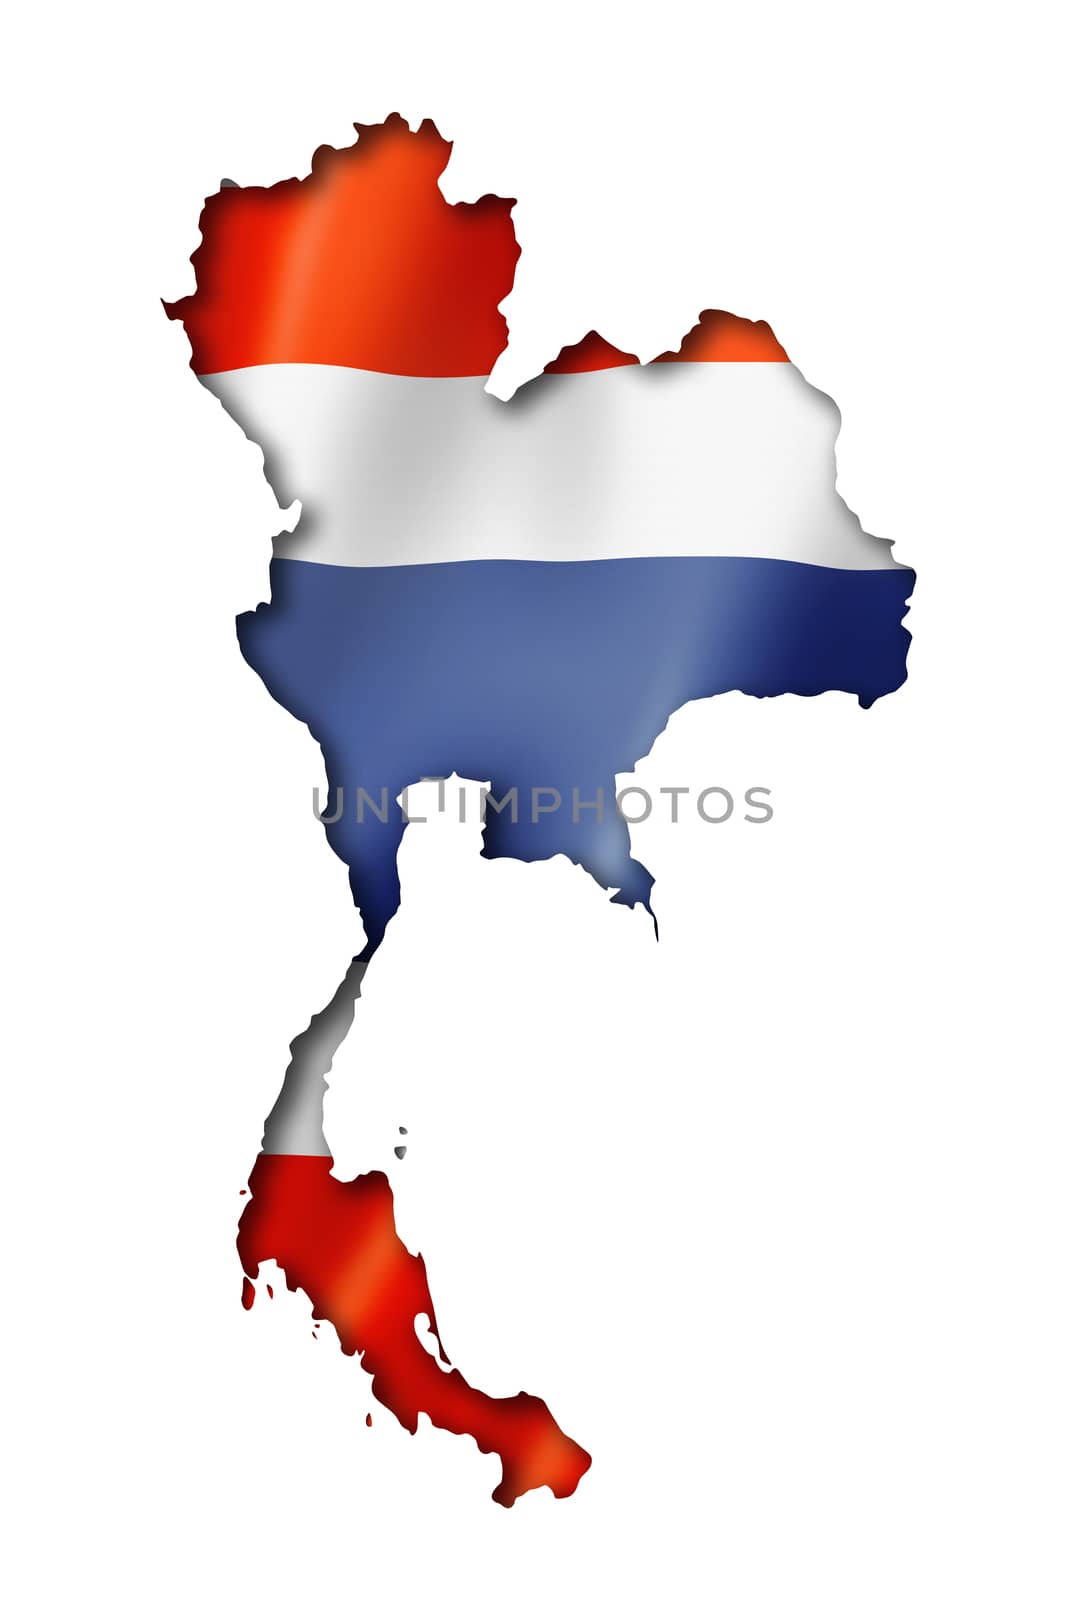 Thailand flag map, three dimensional render, isolated on white